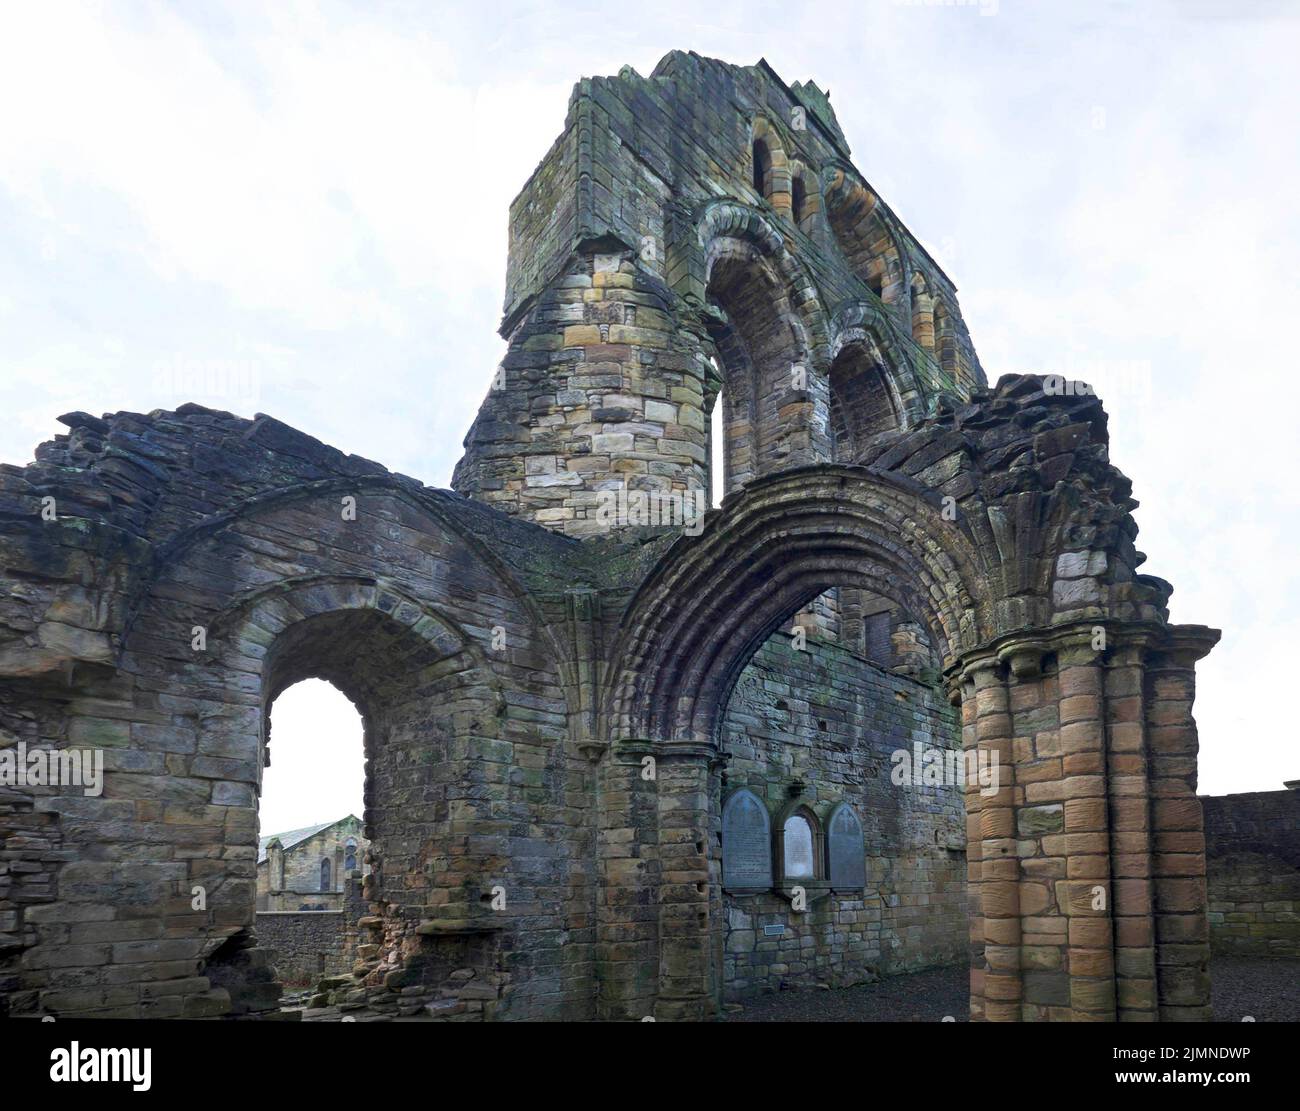 The ruins of Kilwinning Abbey in Kilwinning, Scotland. Built in 1100, it was destroyed in 1560 during the Protestant Reformation. Stock Photo